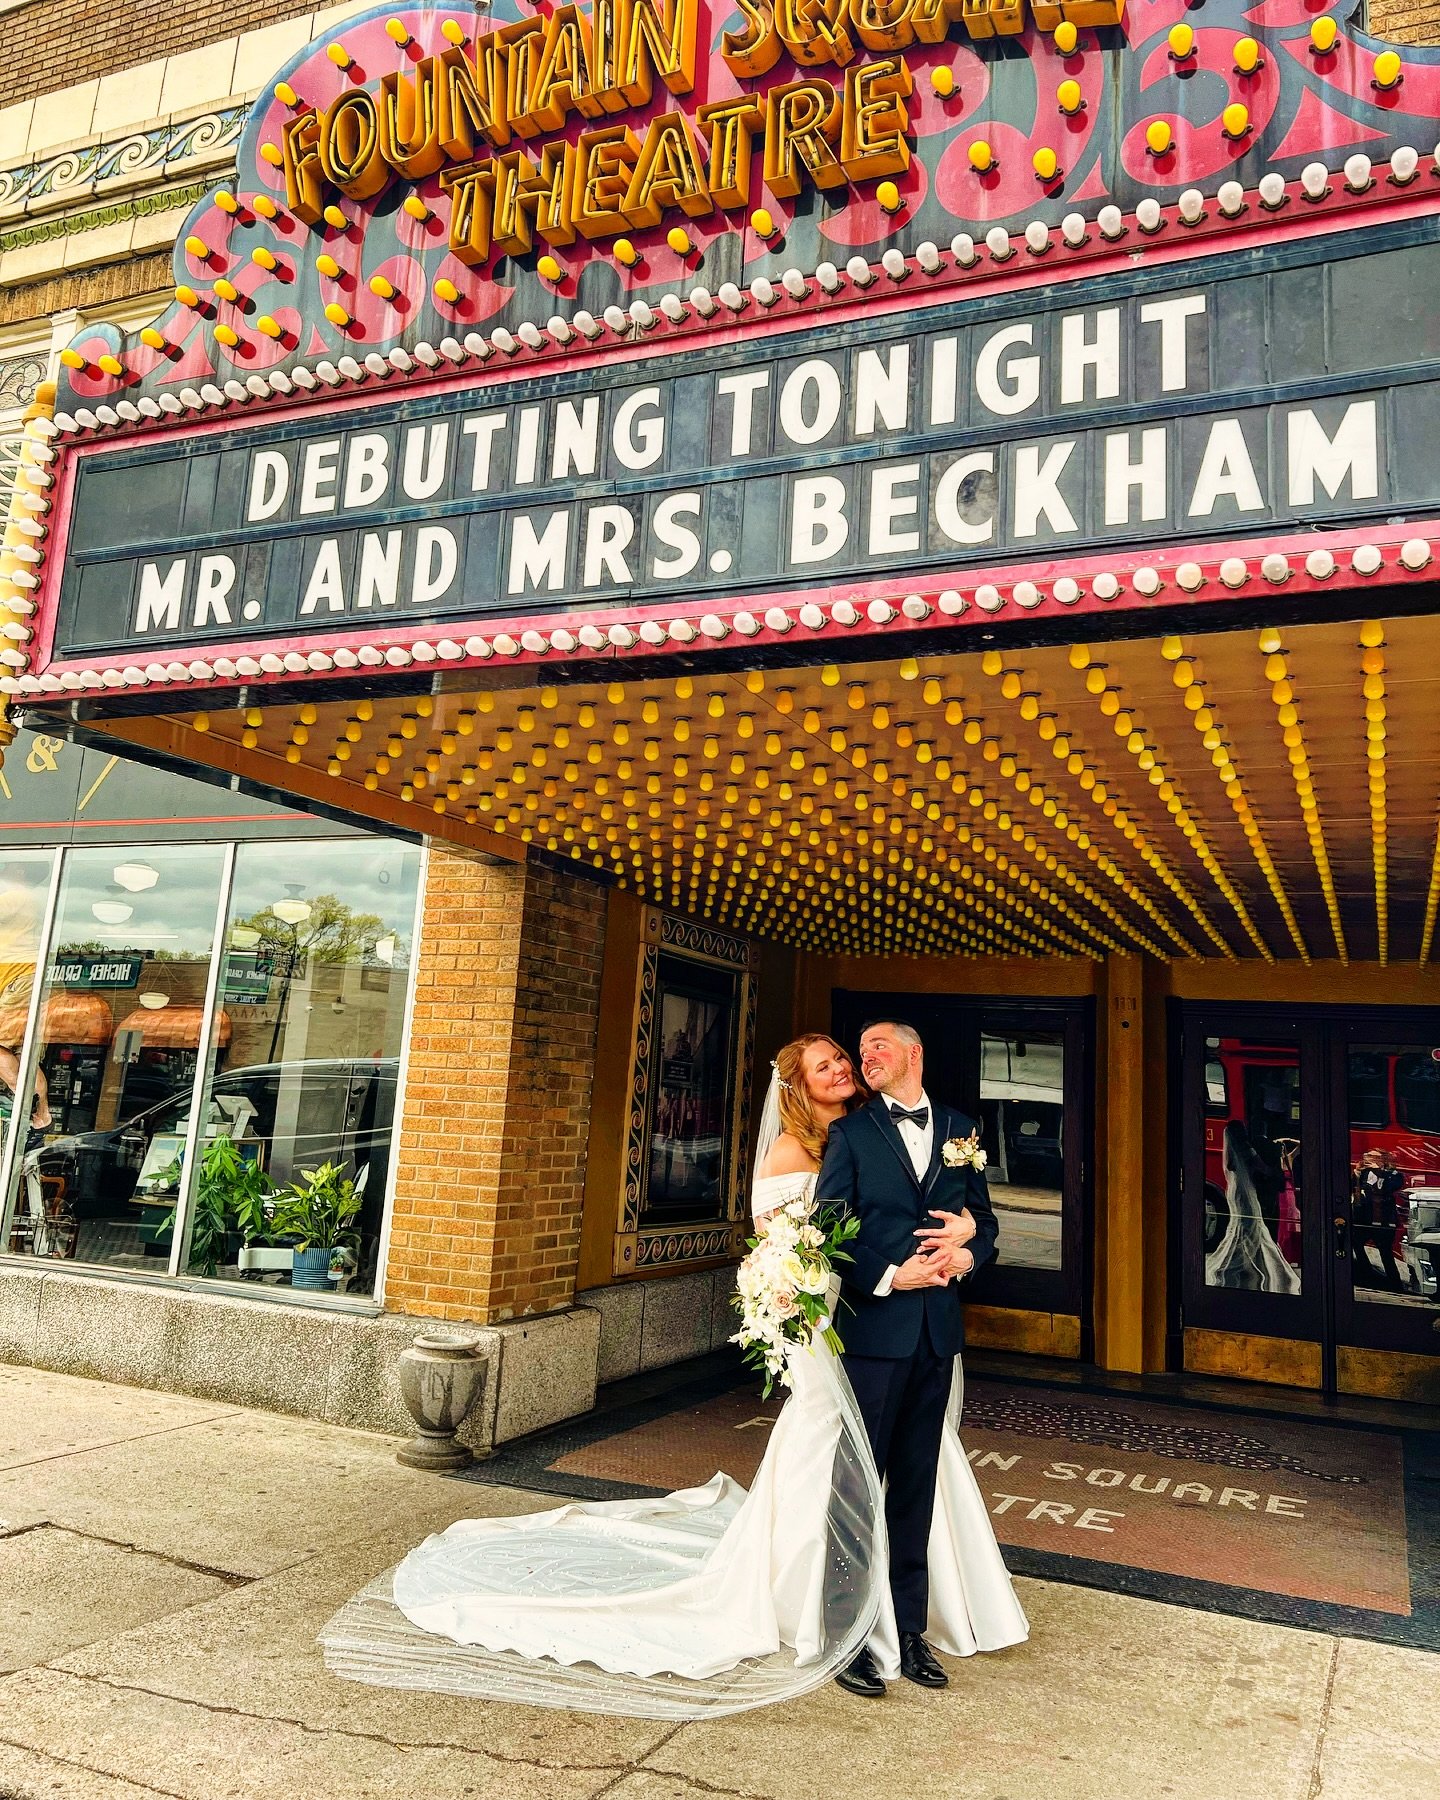 Such a great day with an amazing vendor team 😍

@jessicastricklandphotography 
@mgsdjs 
@ddearing19
@fountainsquaretheatreevents 
@reddotvideo 
@indytrolley 
@hellogorgeousindy 
@melindaspearhuff 
And others! More photos to come!